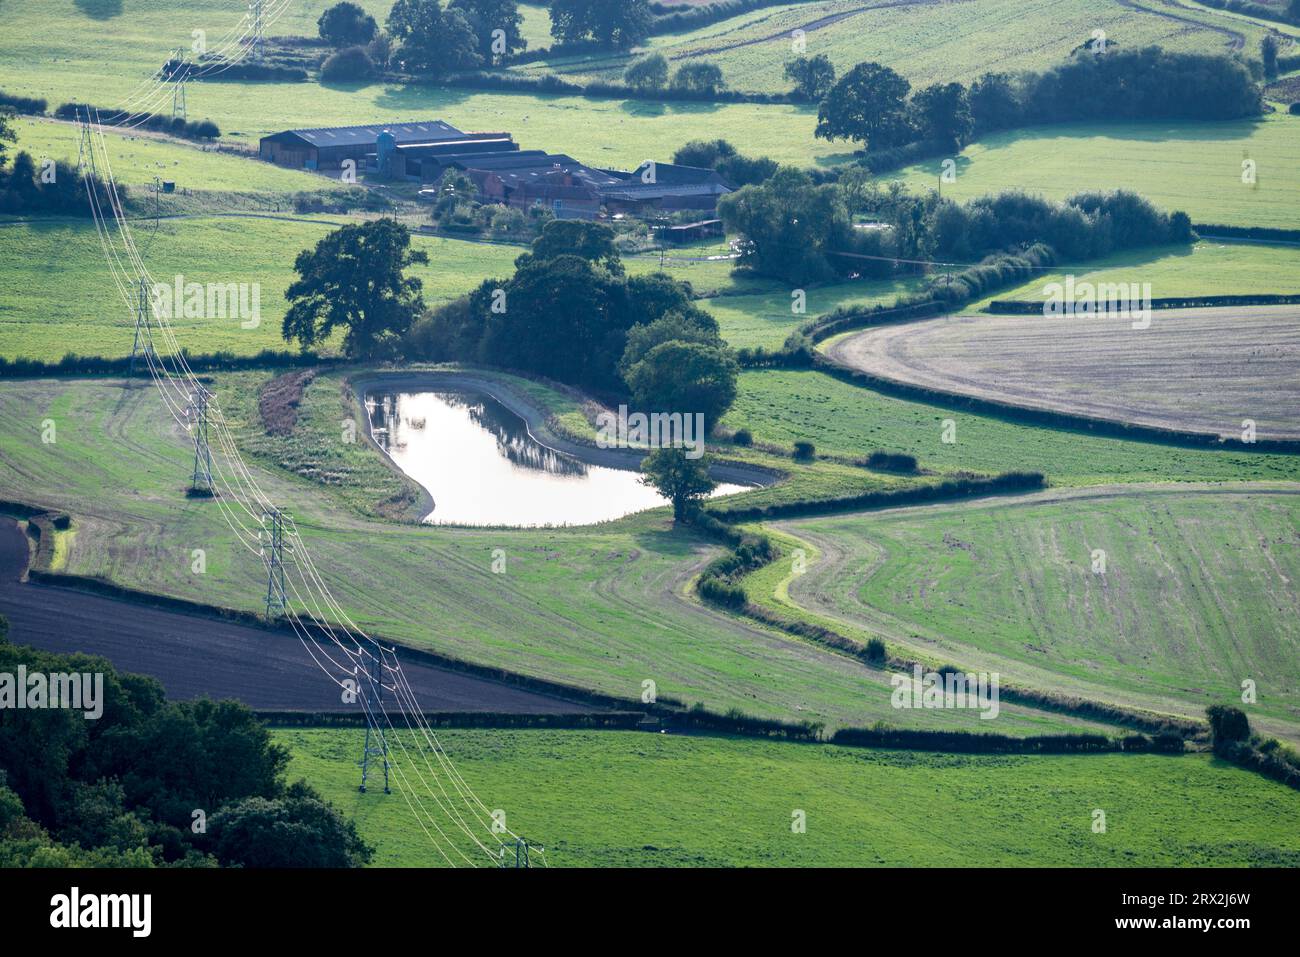 High voltage electricity cables,hanging from steel pylons,passing westwards,over green fields and agricultural farmland of scenic rural England,reflec Stock Photo